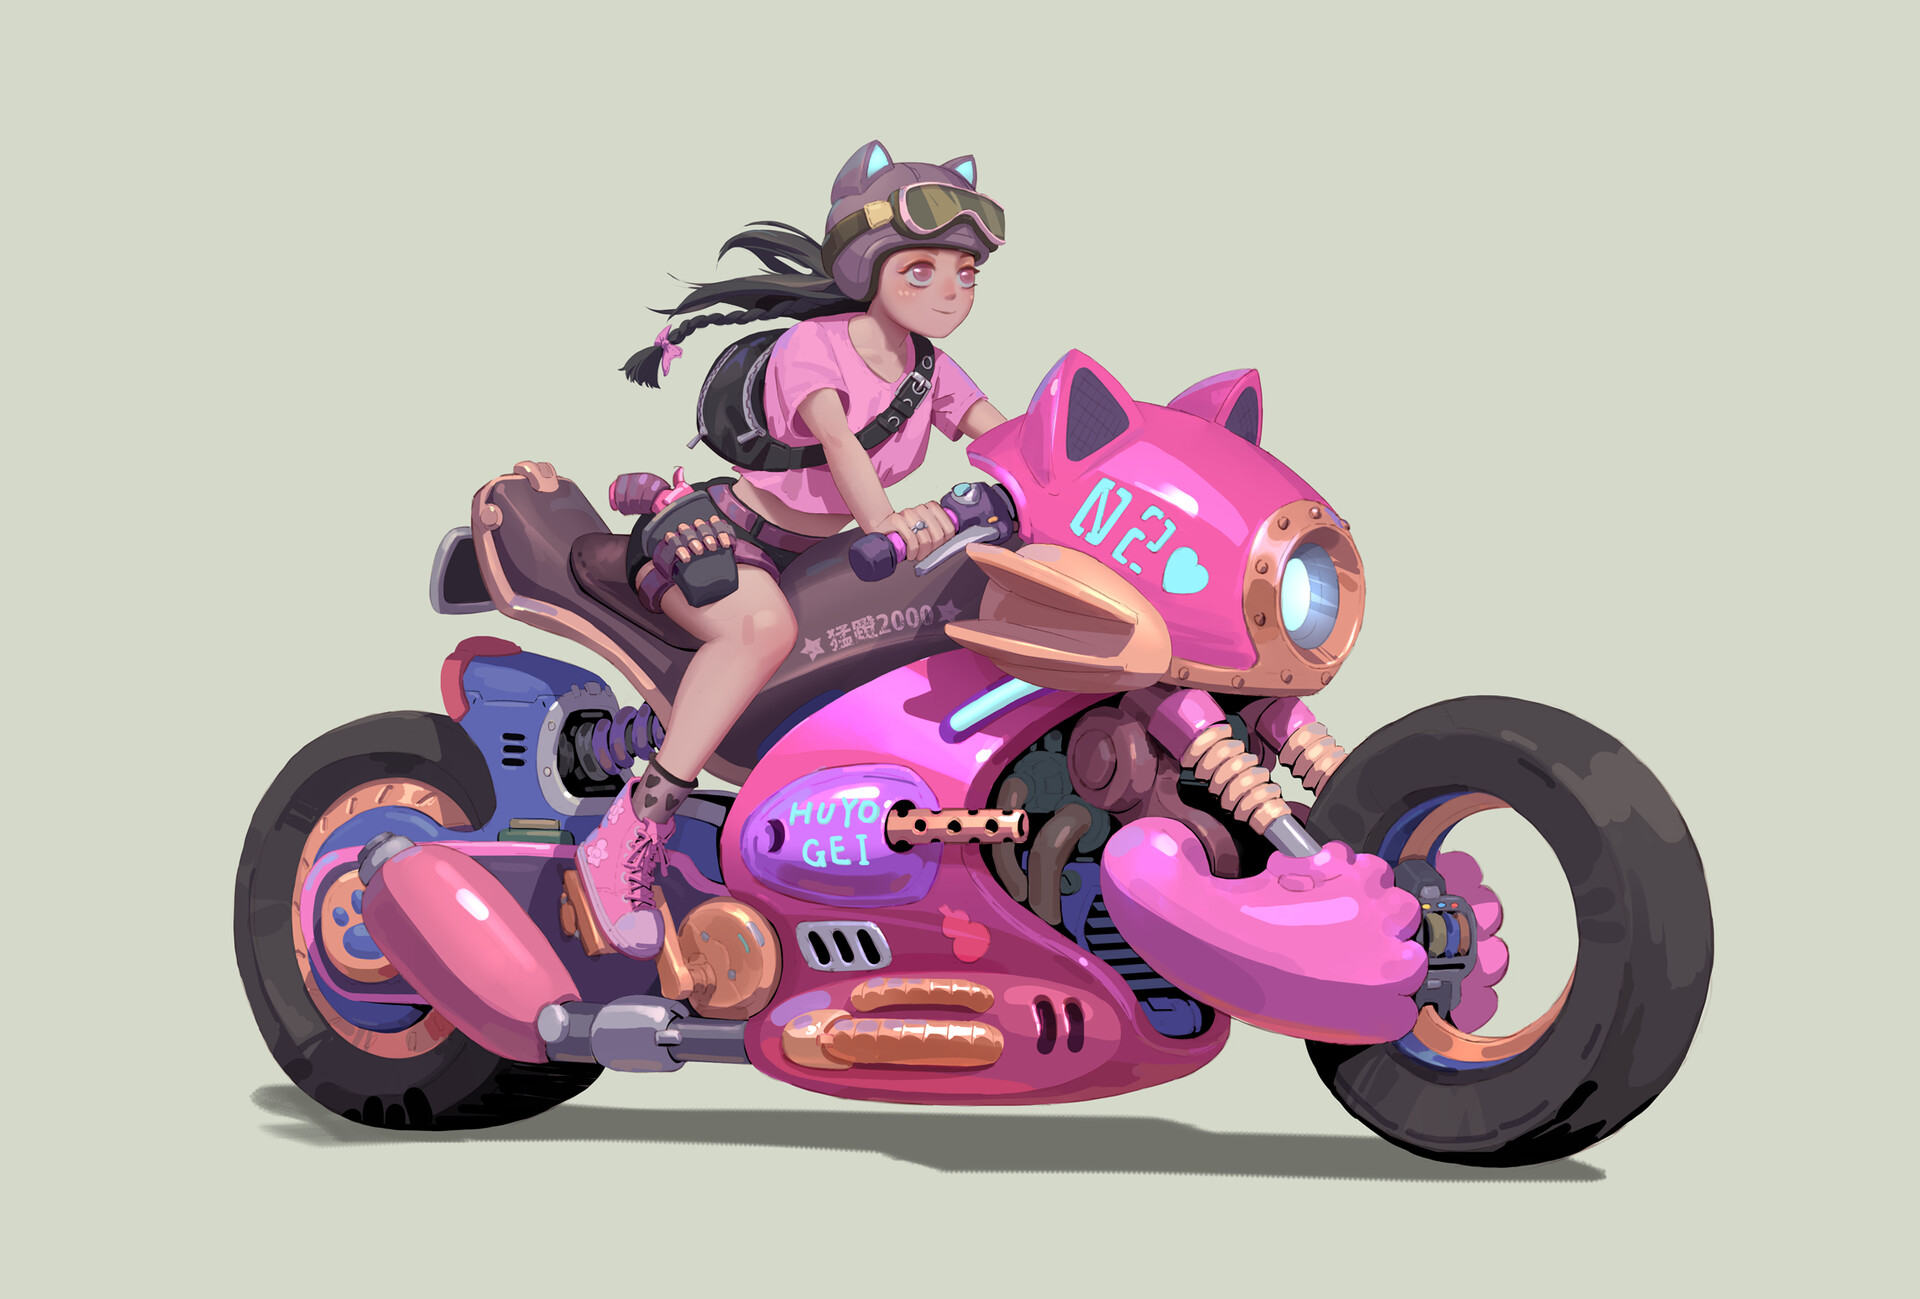 General 1920x1299 artwork Rui Zhang motorcycle women with motorcycles simple background